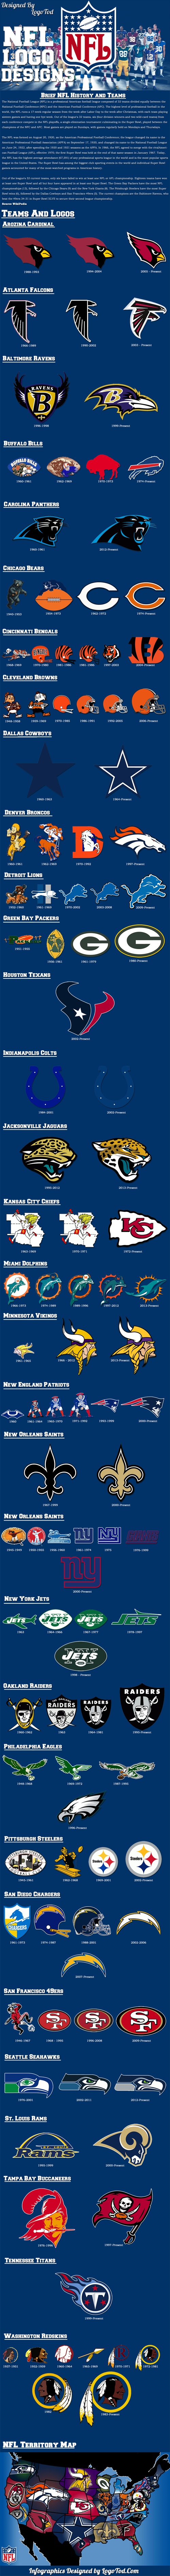 The History of NFL Logo Designs infographic